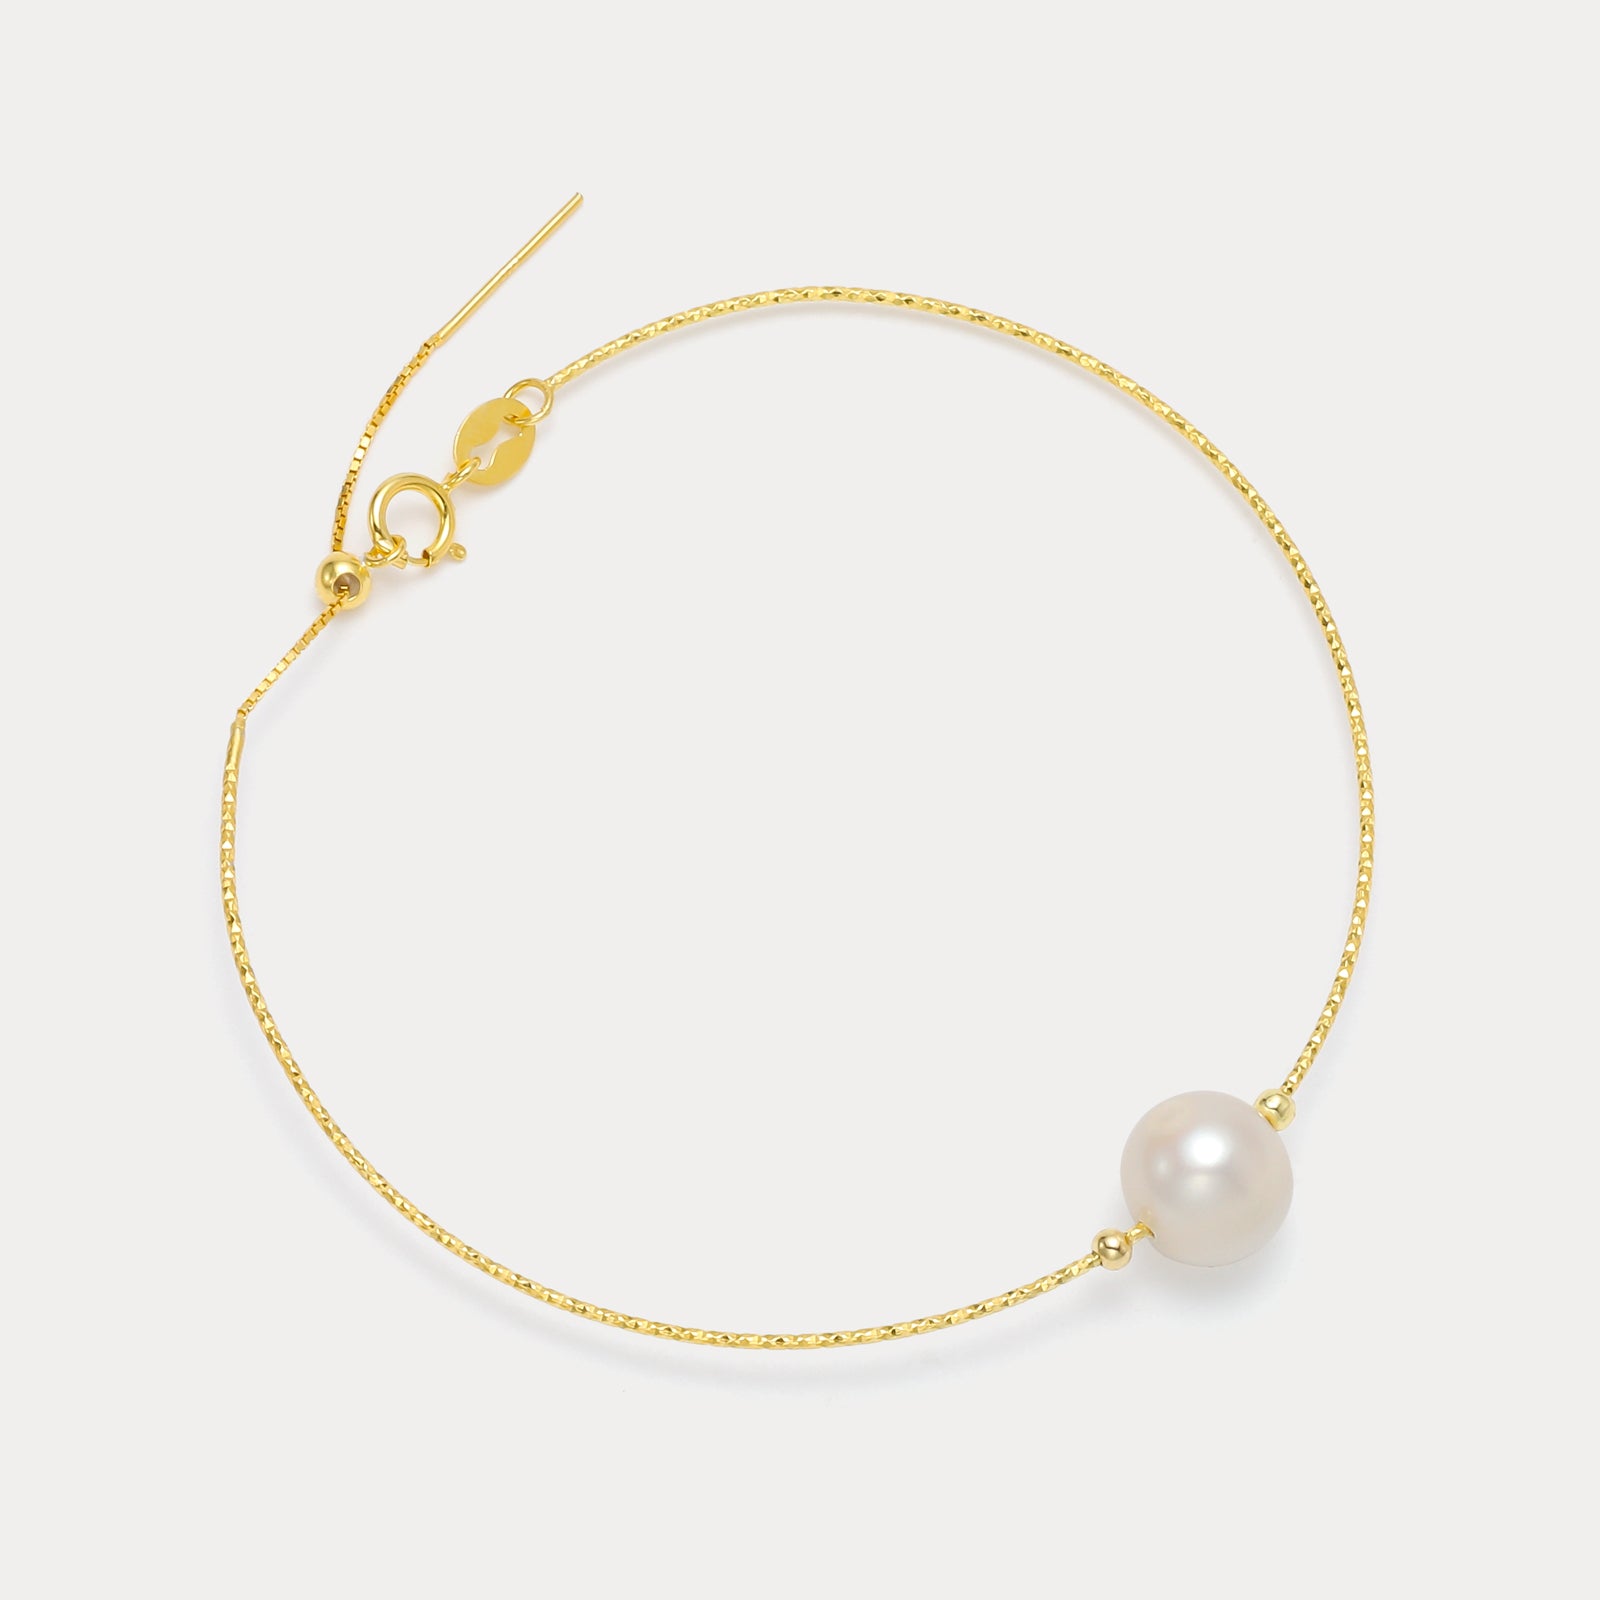 Einfaches Pearl-Armband